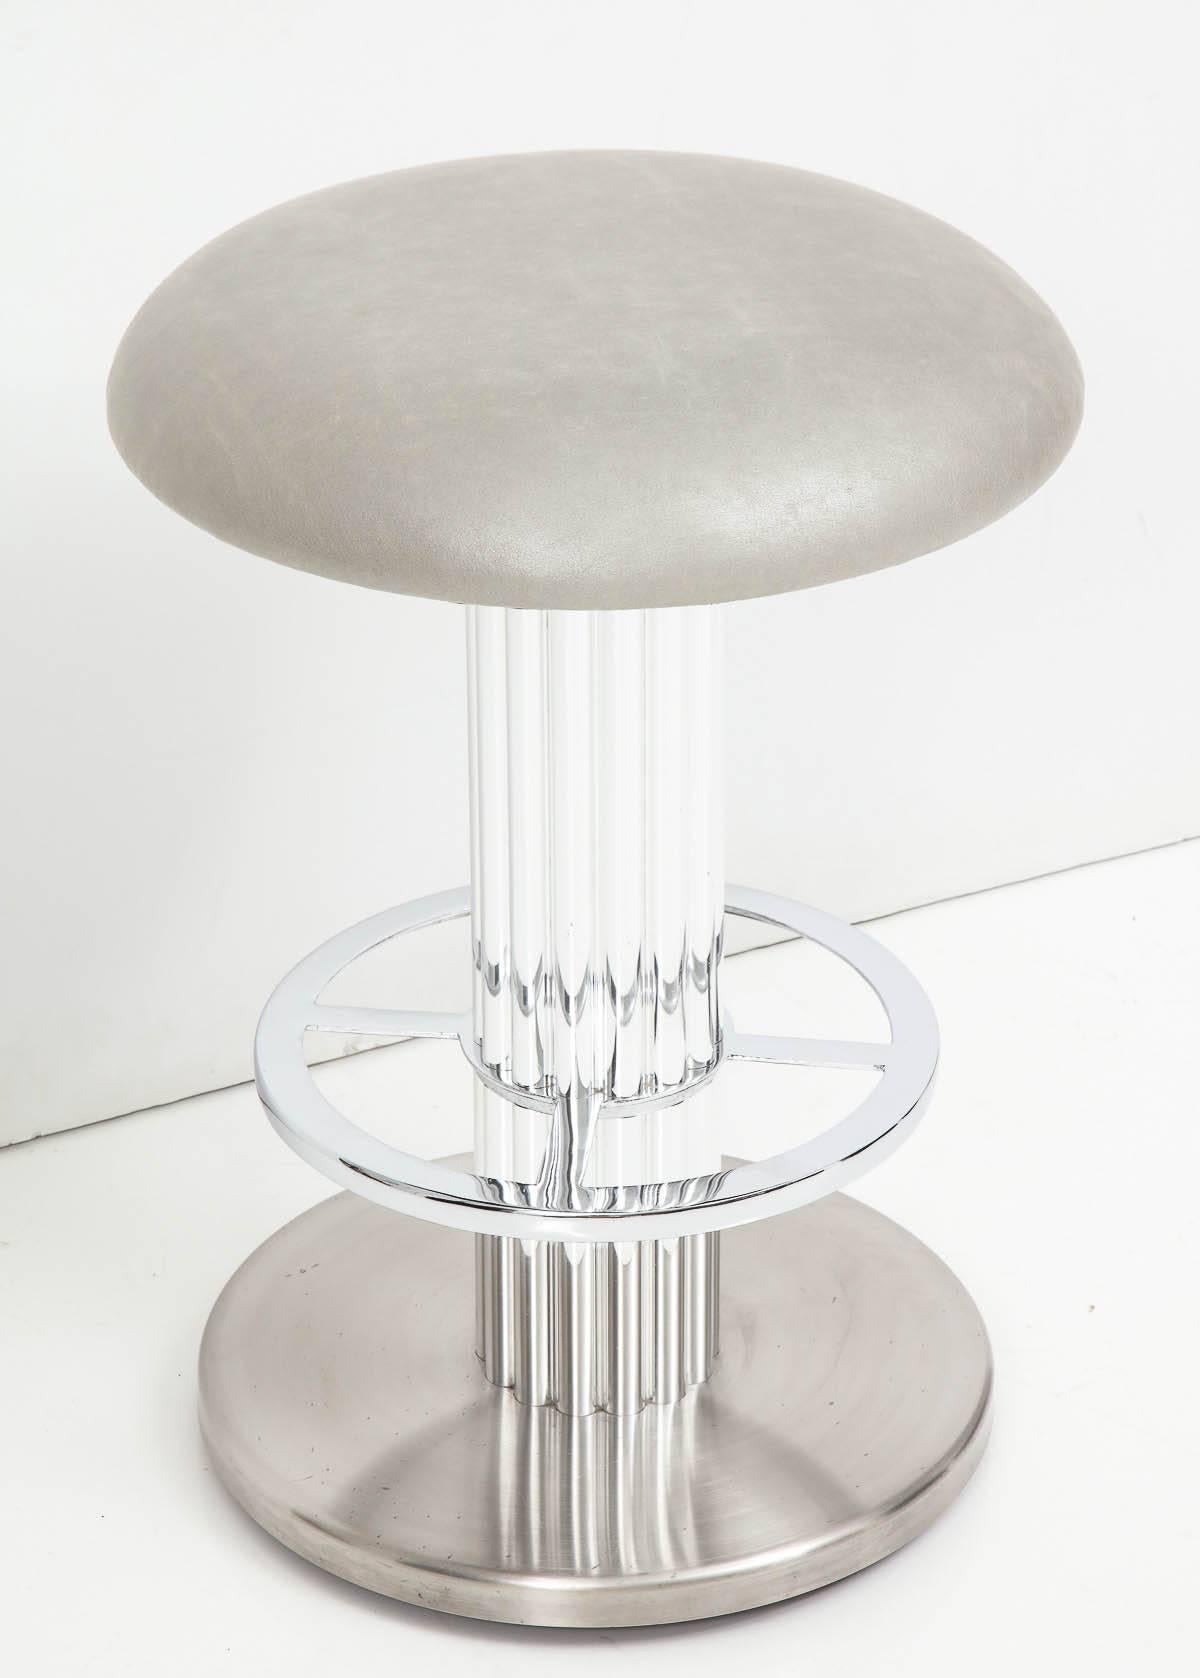 20th Century Designs for Leisure Nickeled Steel Bar Stools